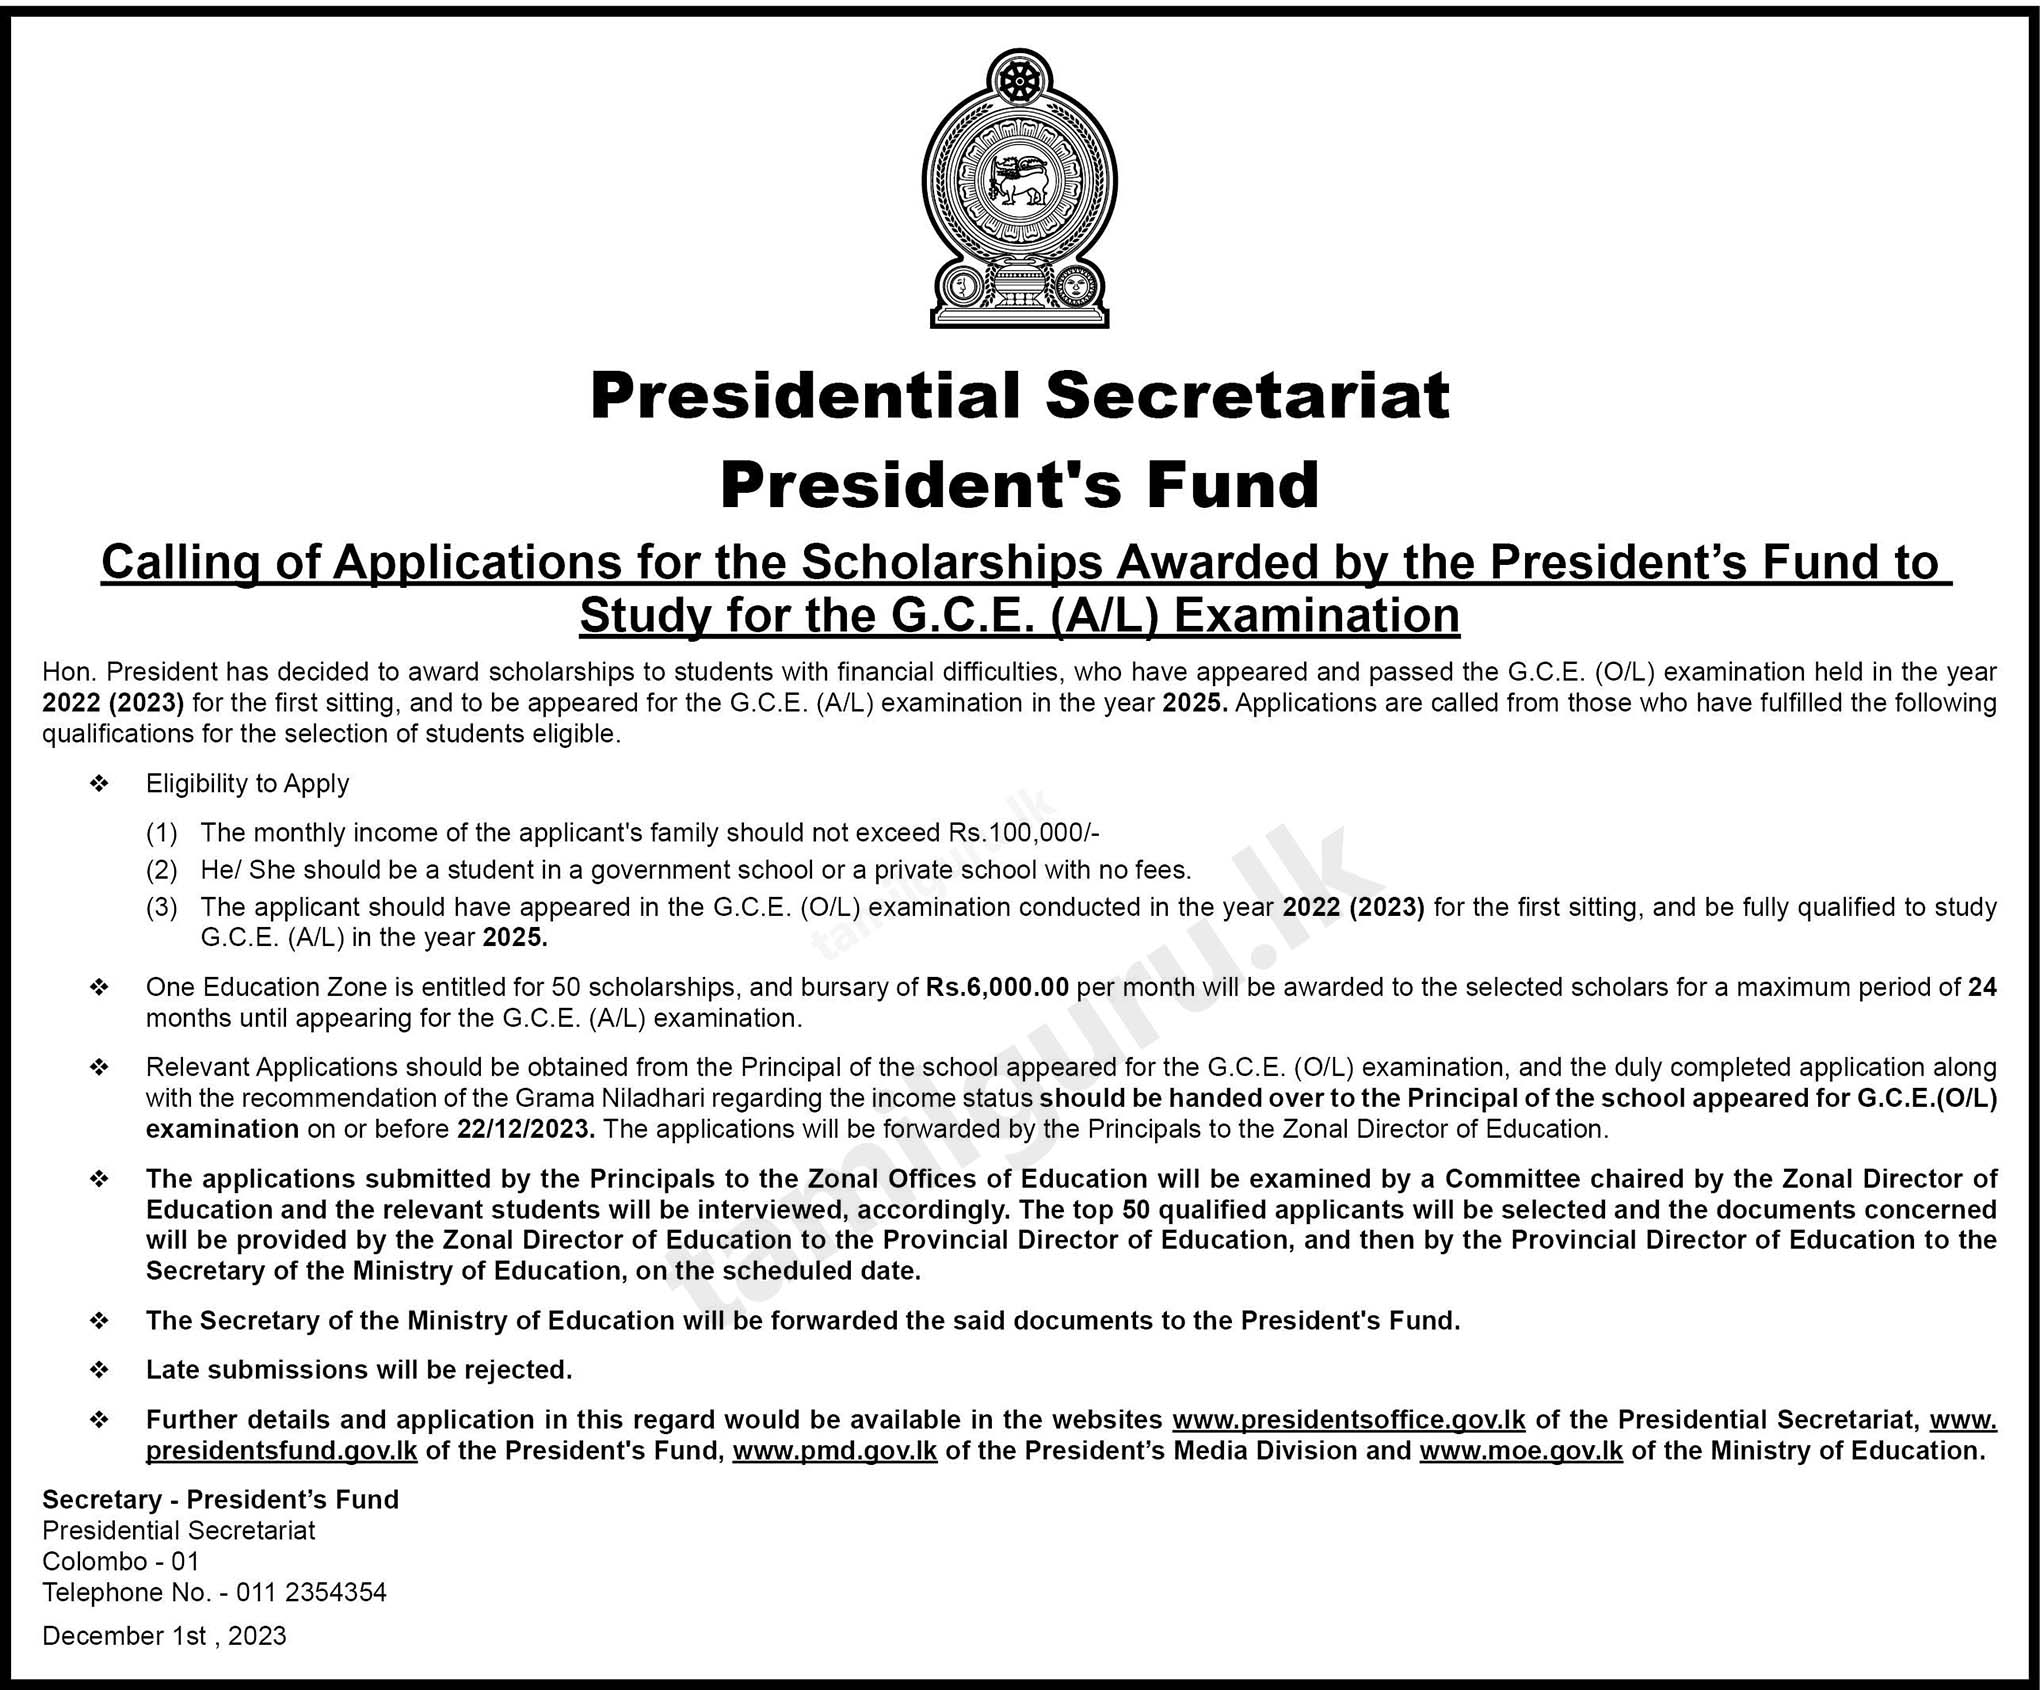 President's Fund Scholarships to Study GCE A/L (For O/L Batch 2022/223)